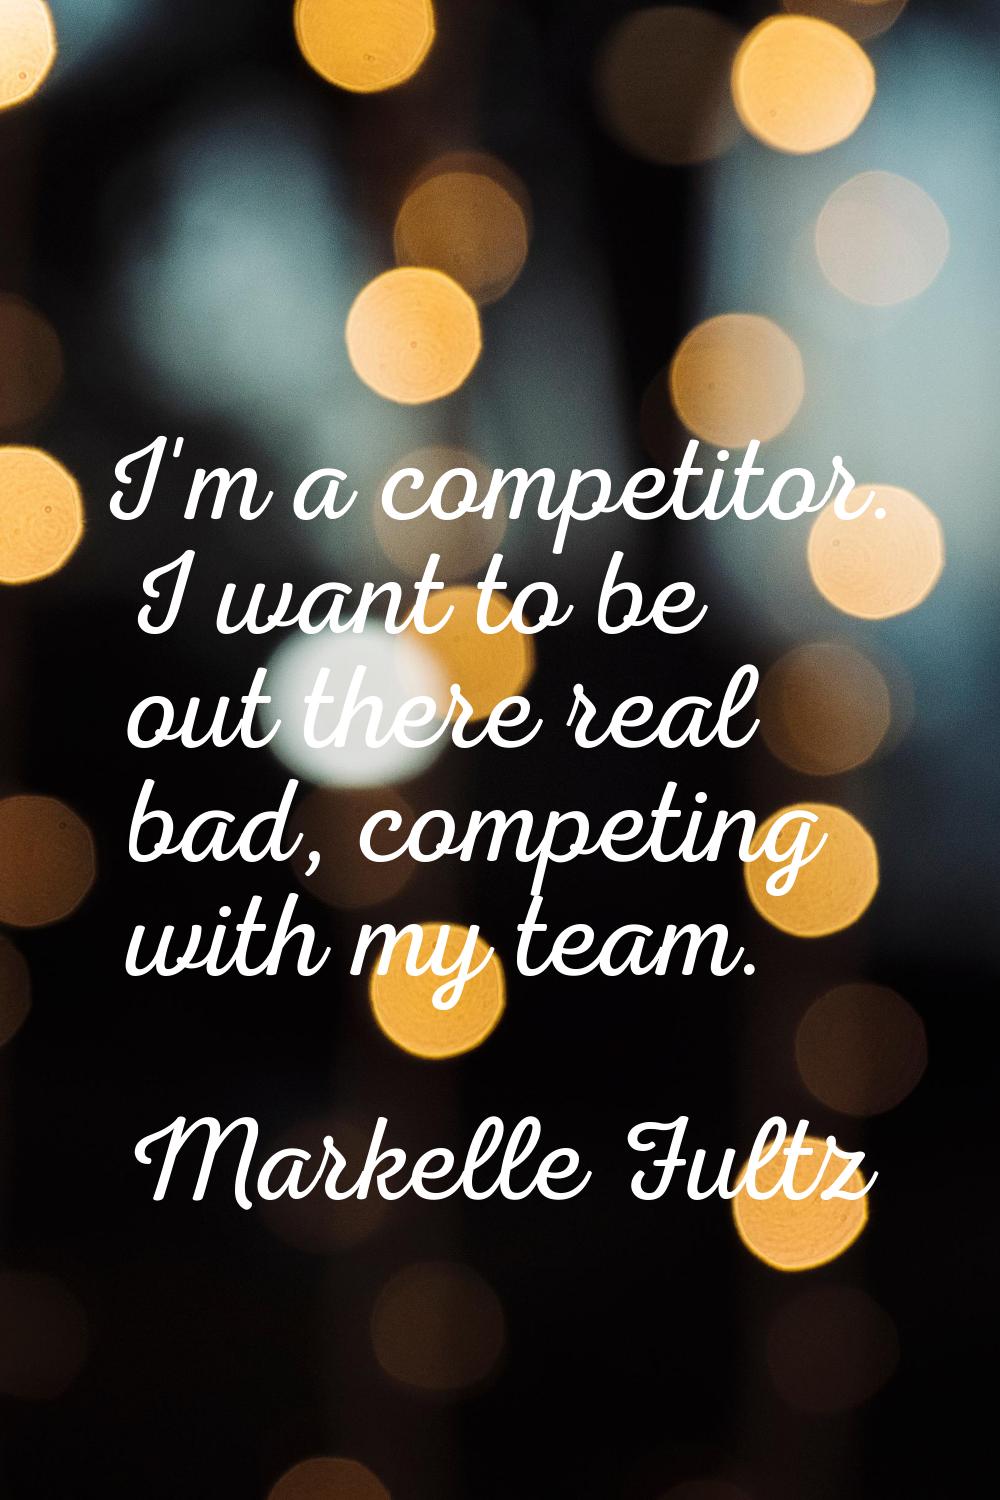 I'm a competitor. I want to be out there real bad, competing with my team.